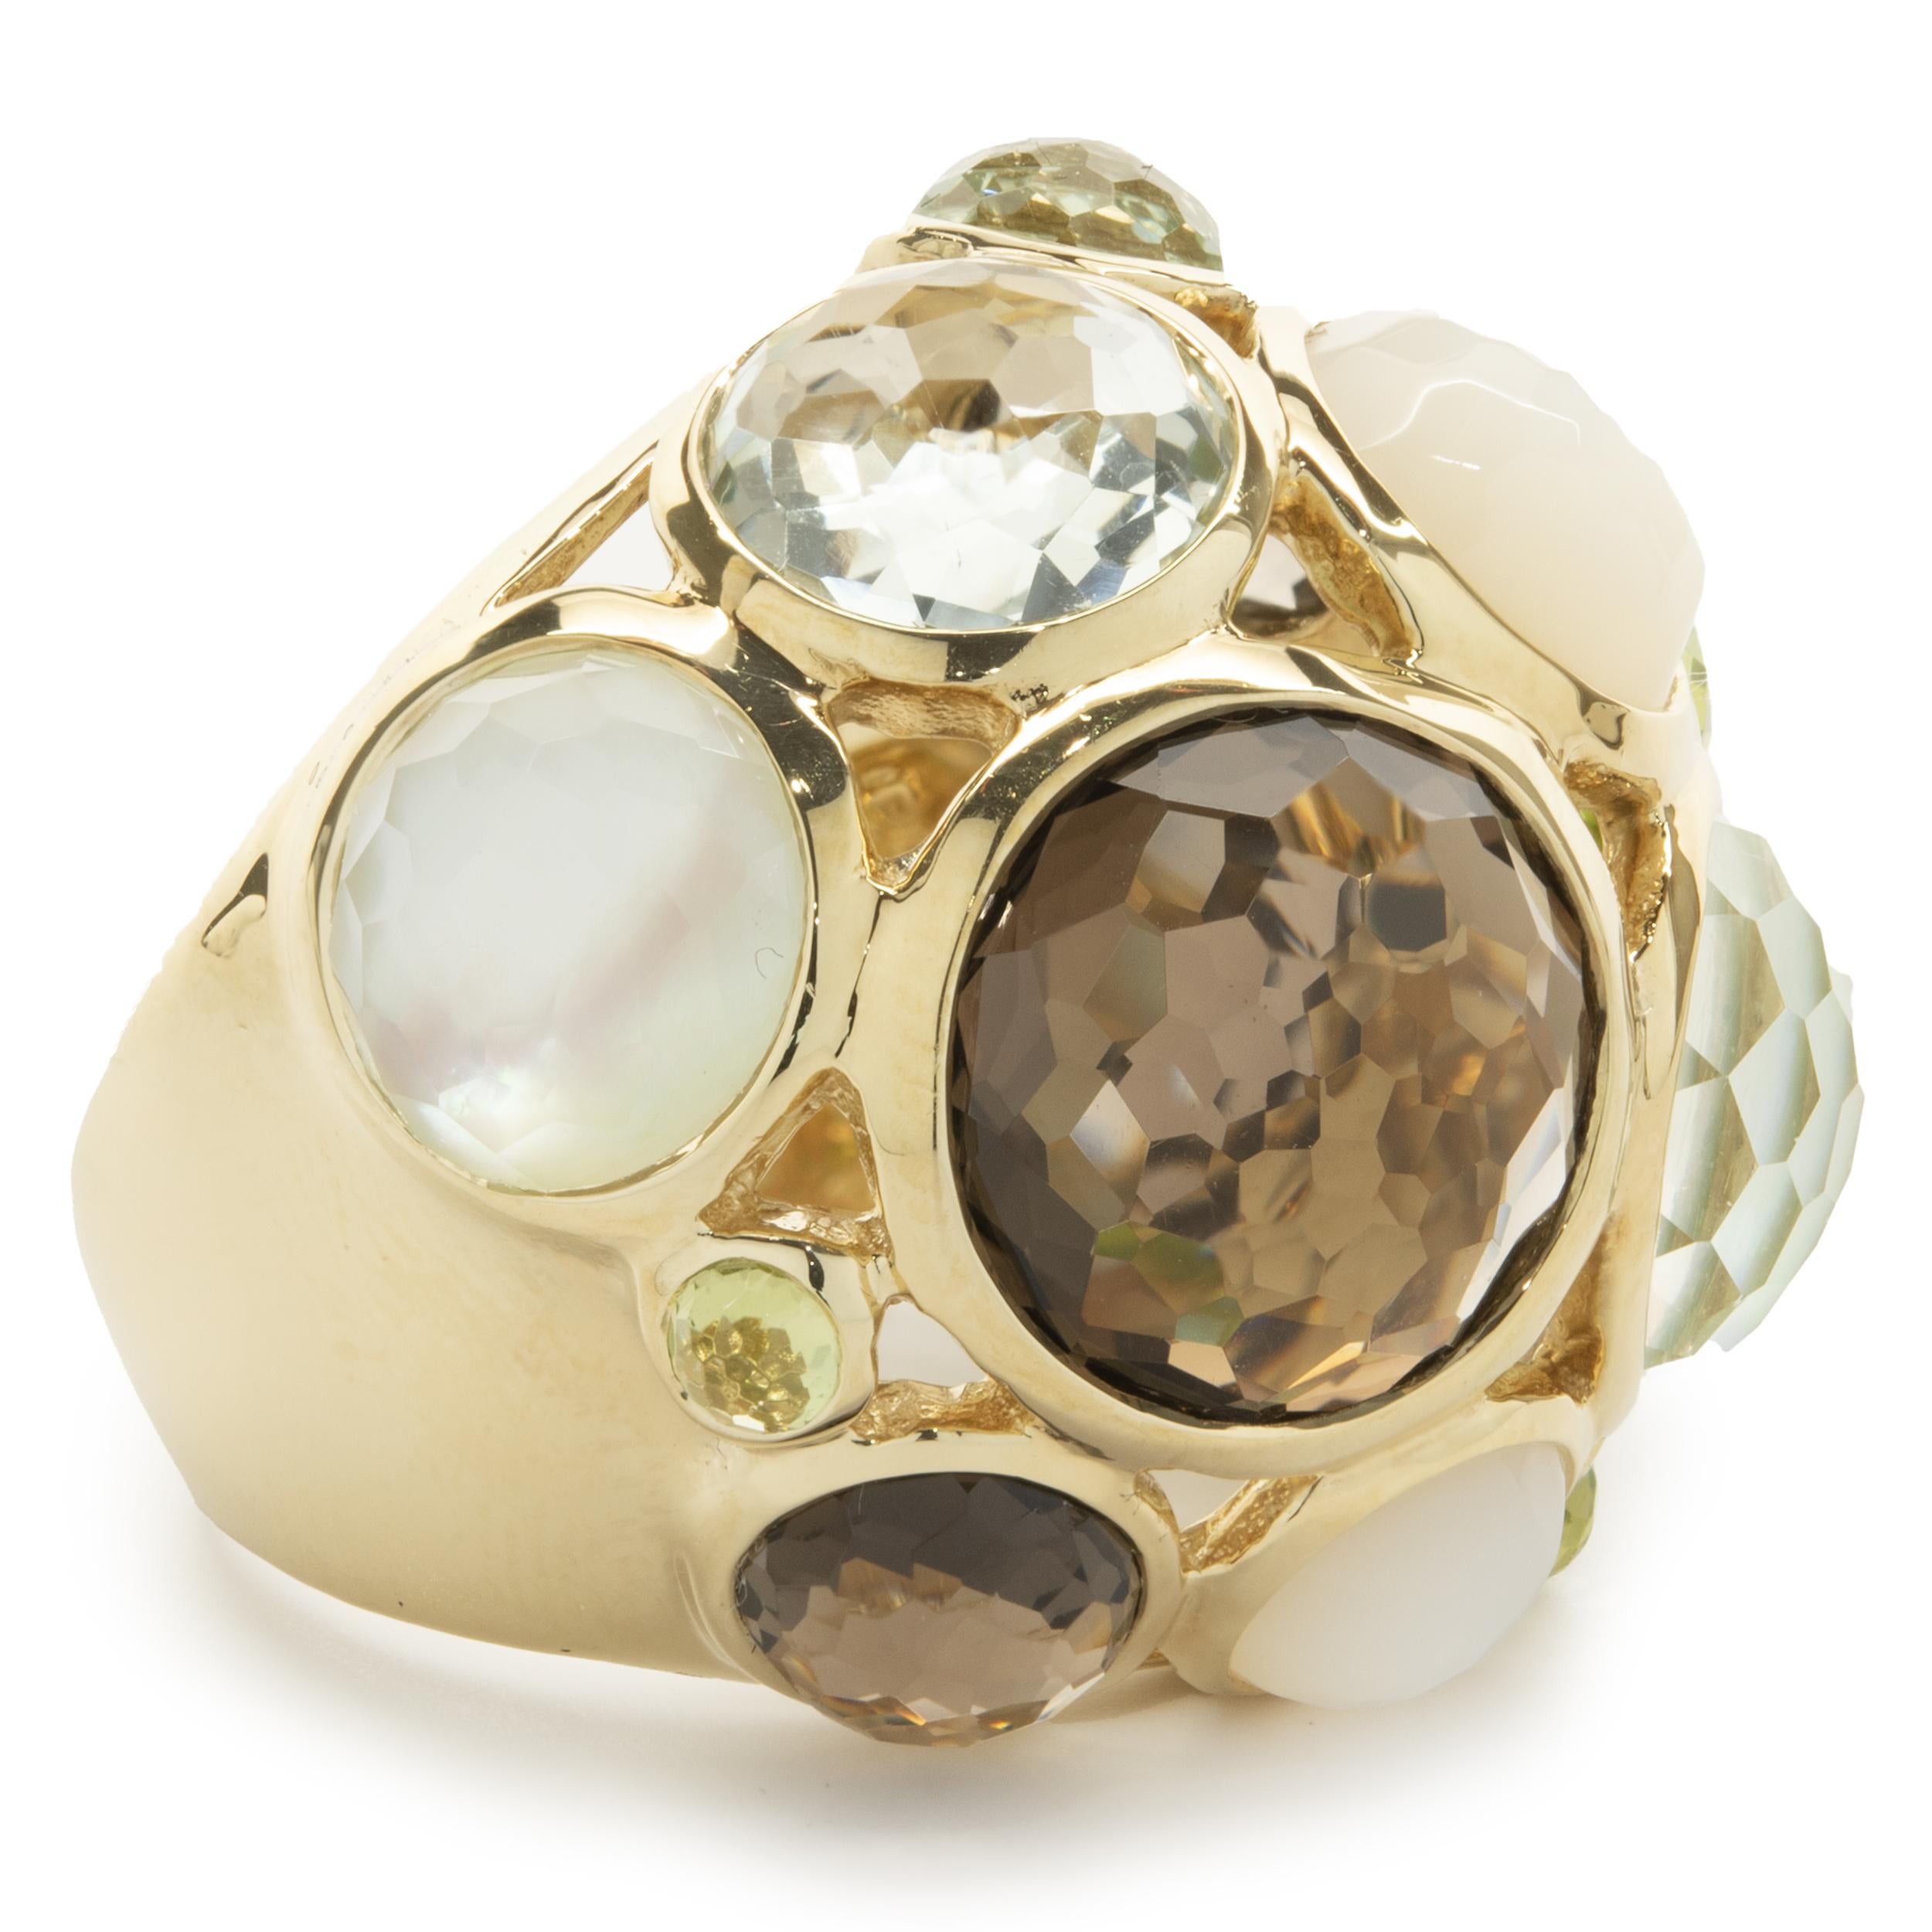 Designer: Ippolita
Material: 18K yellow gold
Weight: 18.66 grams
Dimensions: ring top measures 27.7mm wide
Size: 7 (please allow 2 additional days for sizing)
